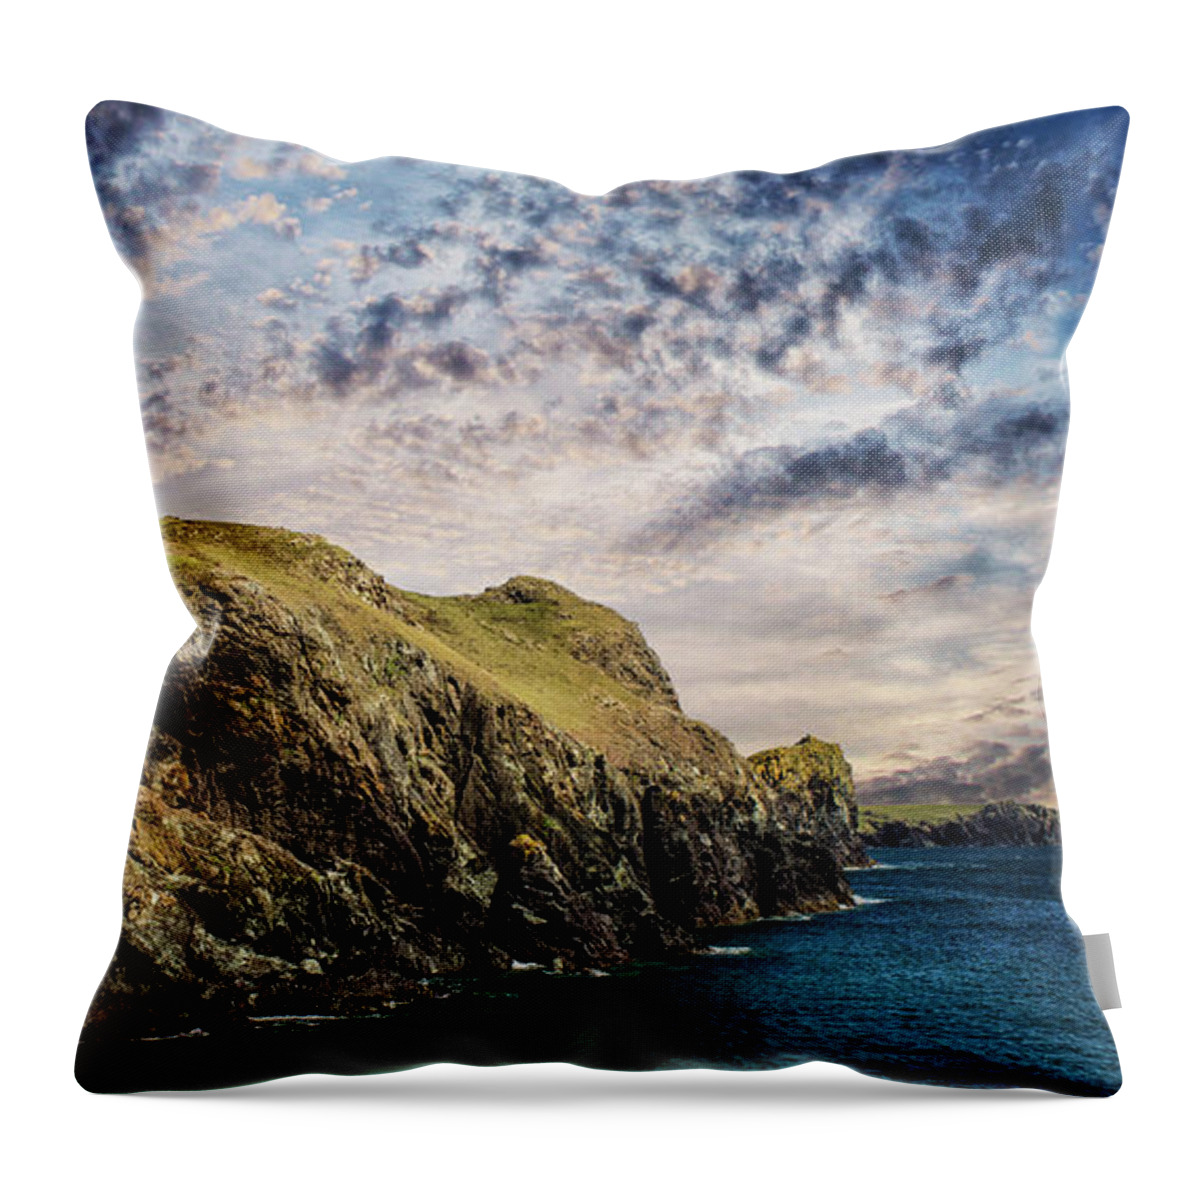 Cornwall Throw Pillow featuring the photograph Rugged Landscape by Martin Newman